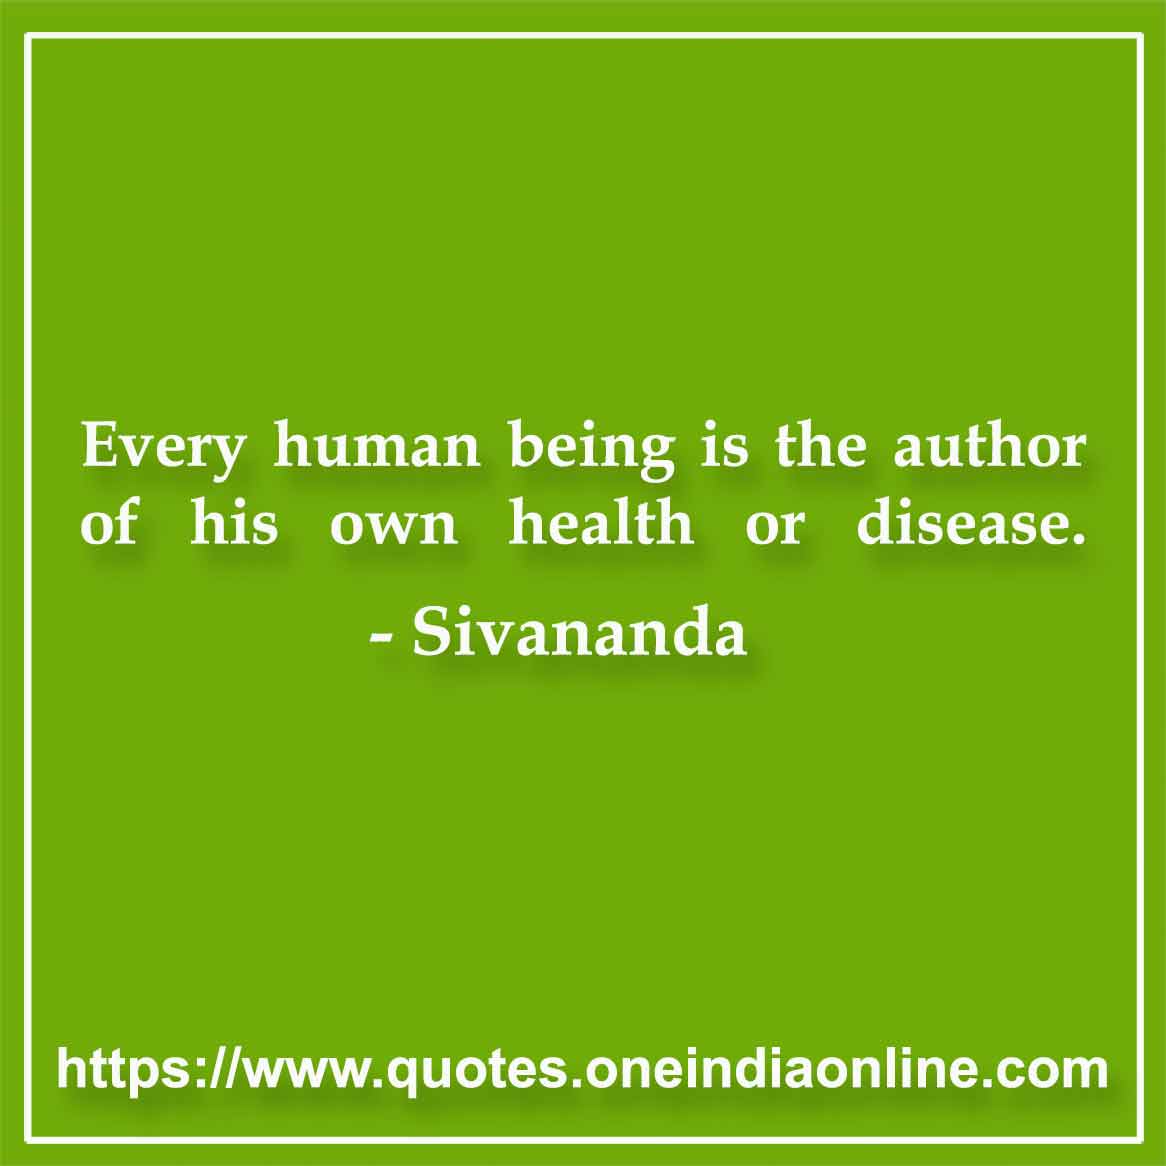 Every human being is the author of his own health or disease.

- Quotations in English by Sivananda